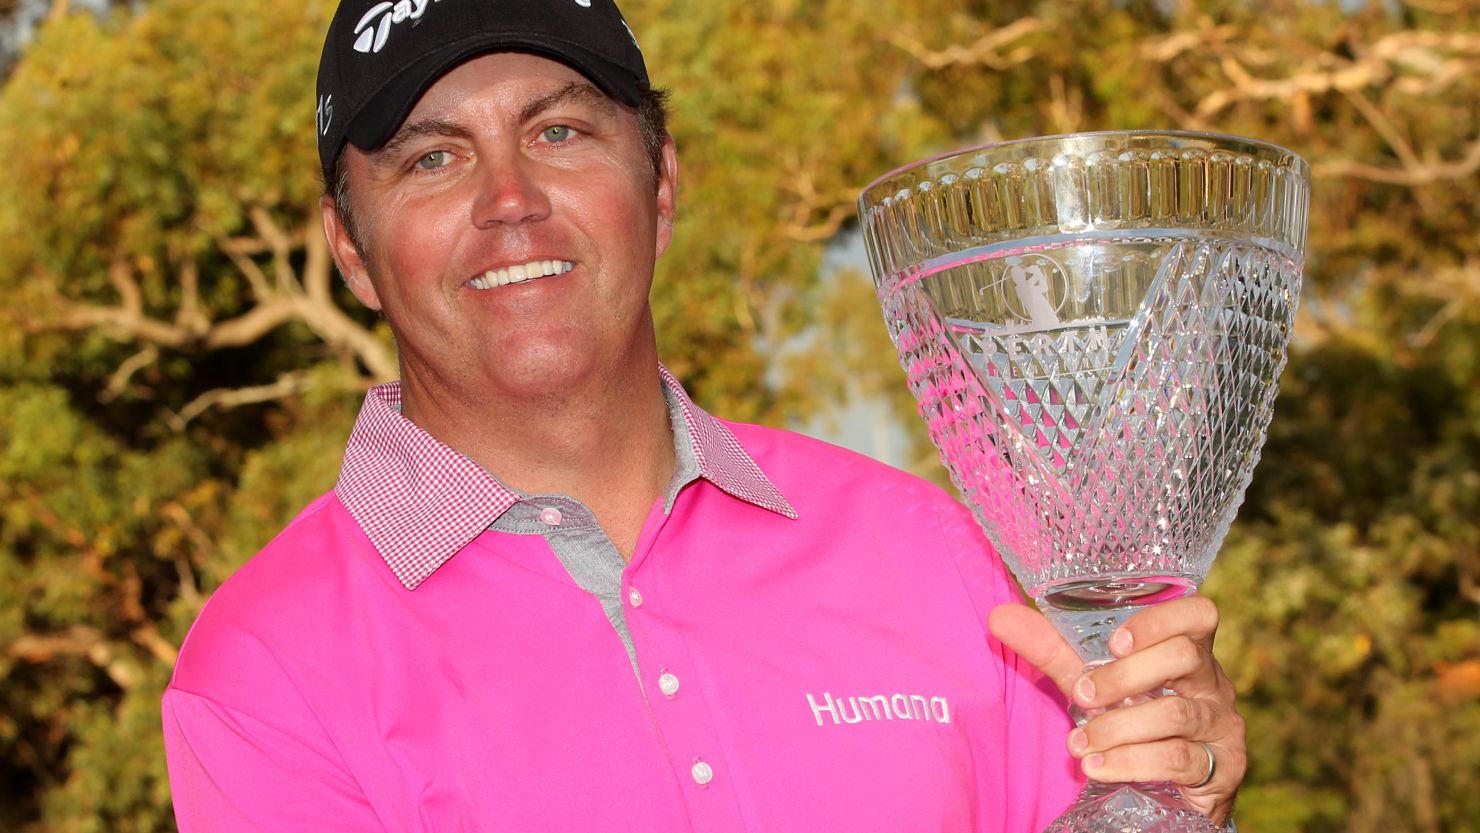 Bo Van Pelt secured the trophy and a check for $333,000 with victory at the Perth International.